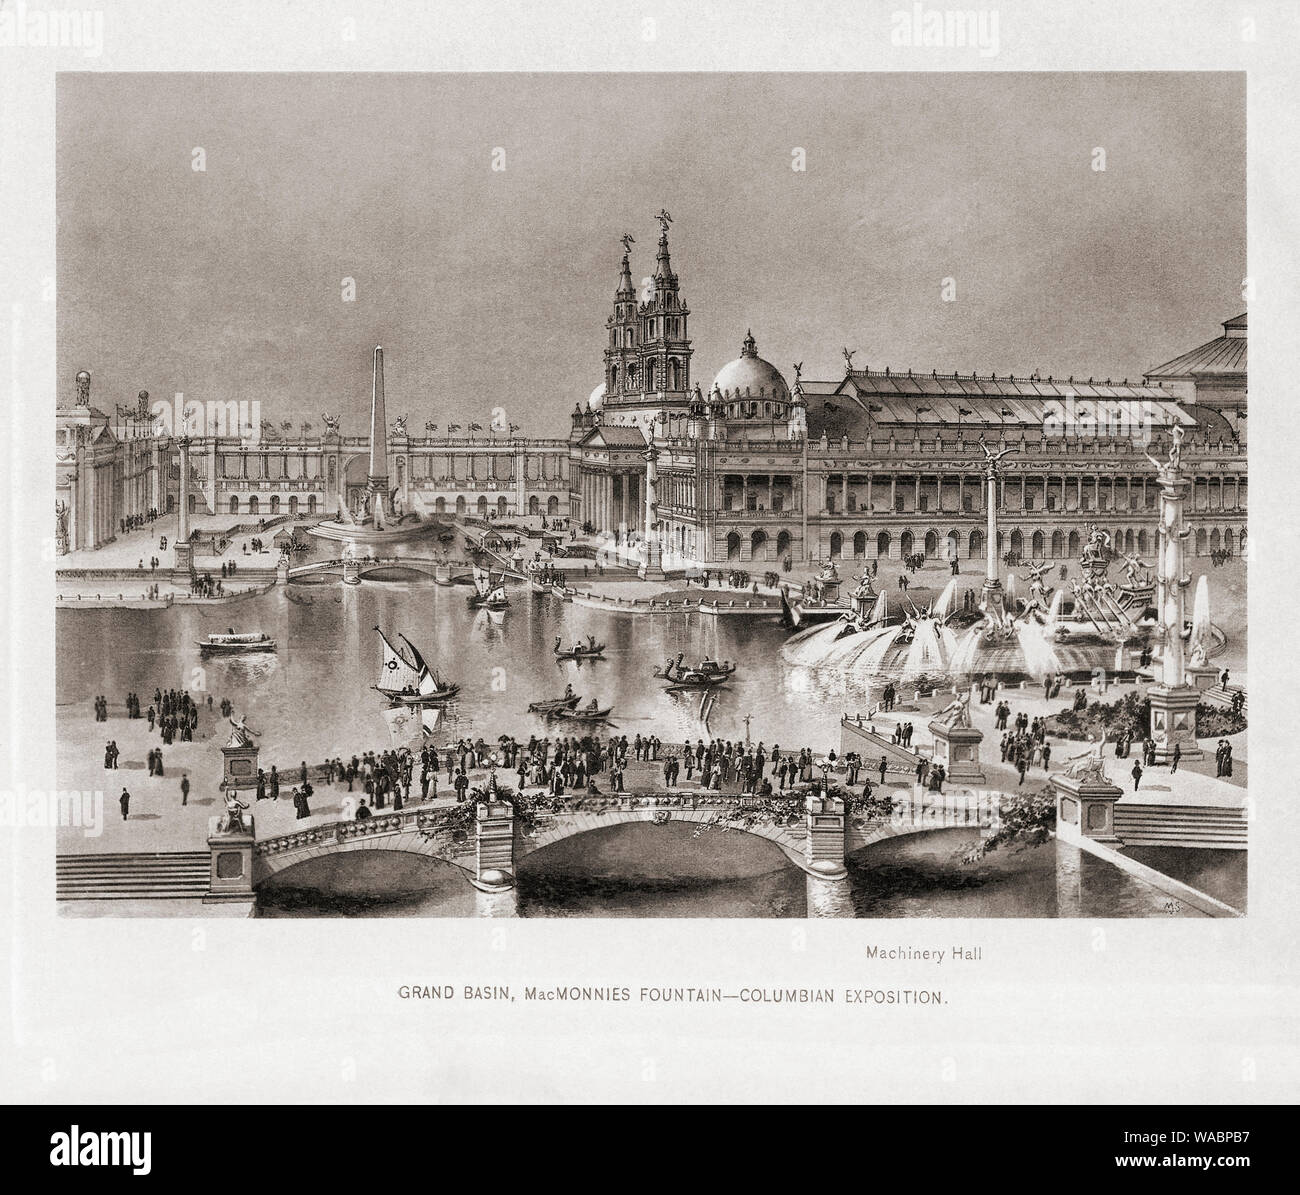 Artist’s impression of World's Columbian Exposition in Chicago, in 1893.  The Fair celebrated the 400th anniversary of Christopher Columbus's arrival in the New World.   From the book The United States of America - One Hundred Albertype Illustrations From Recent Negatives of the Most Noted Scenes of Our Country, published 1893. Stock Photo